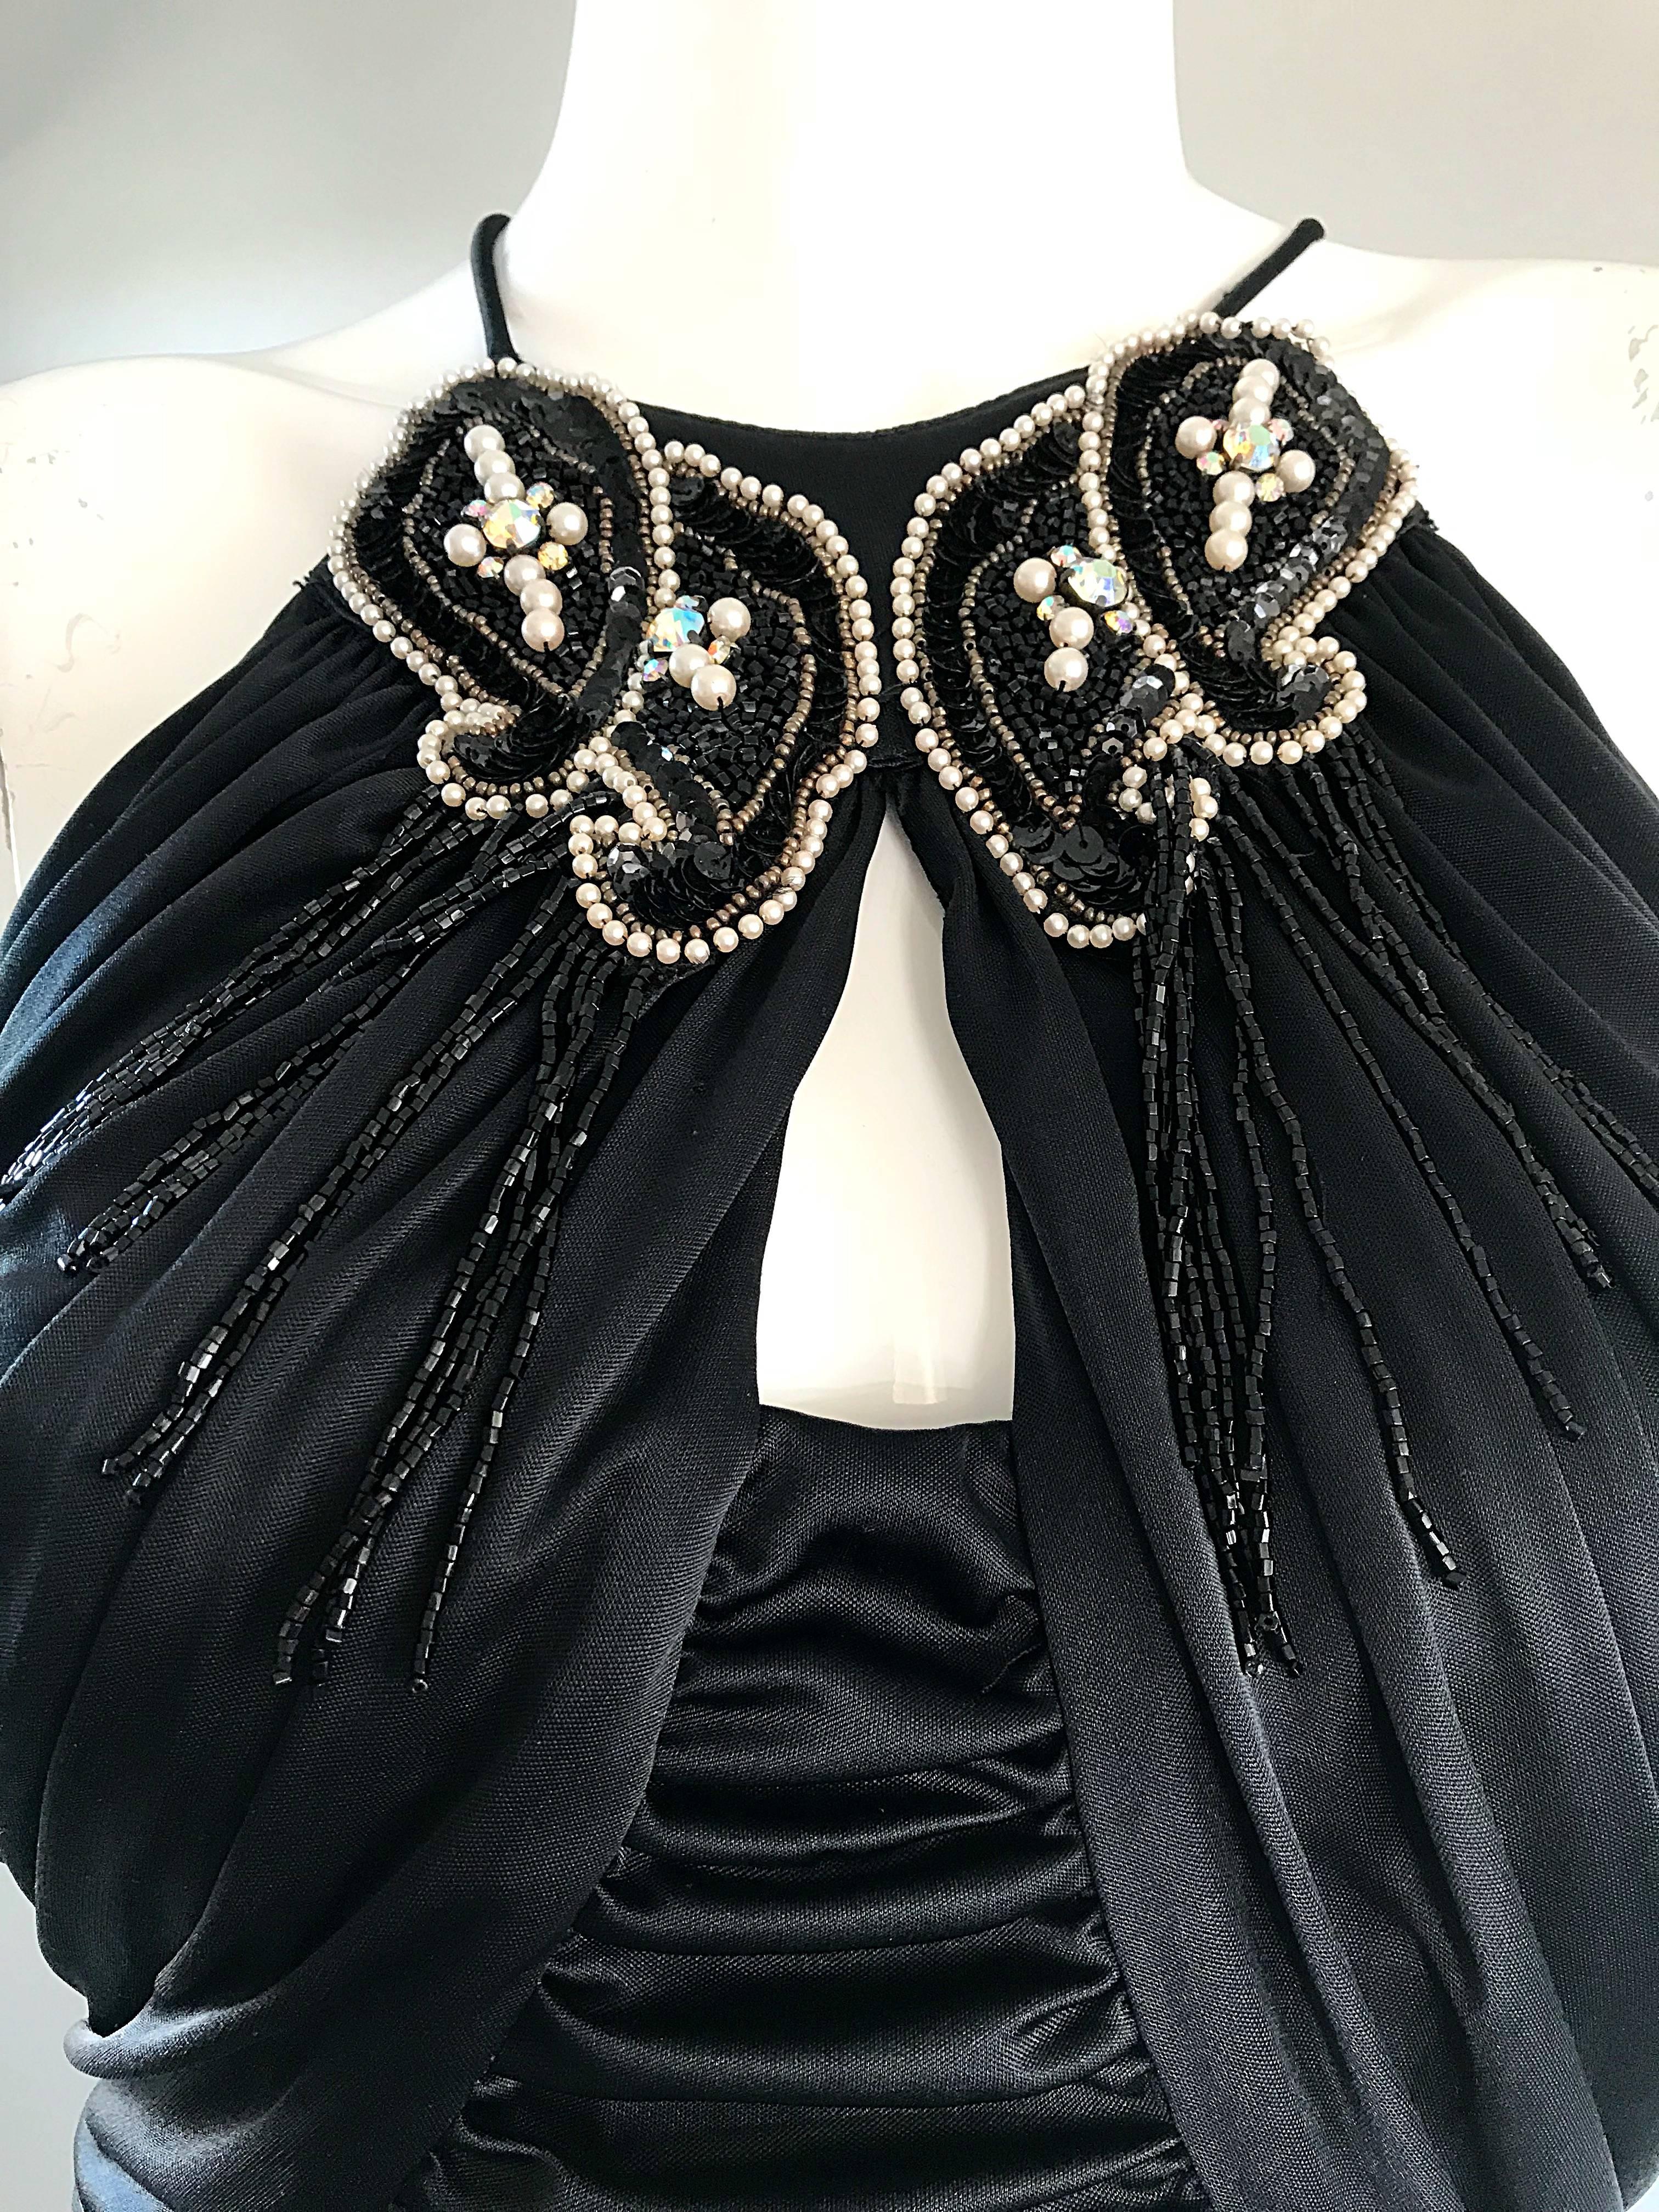 1980s Vintage Samir Black Beaded + Pearl + Rhinestone Sexy Ruched 80s Dress In Excellent Condition For Sale In San Diego, CA